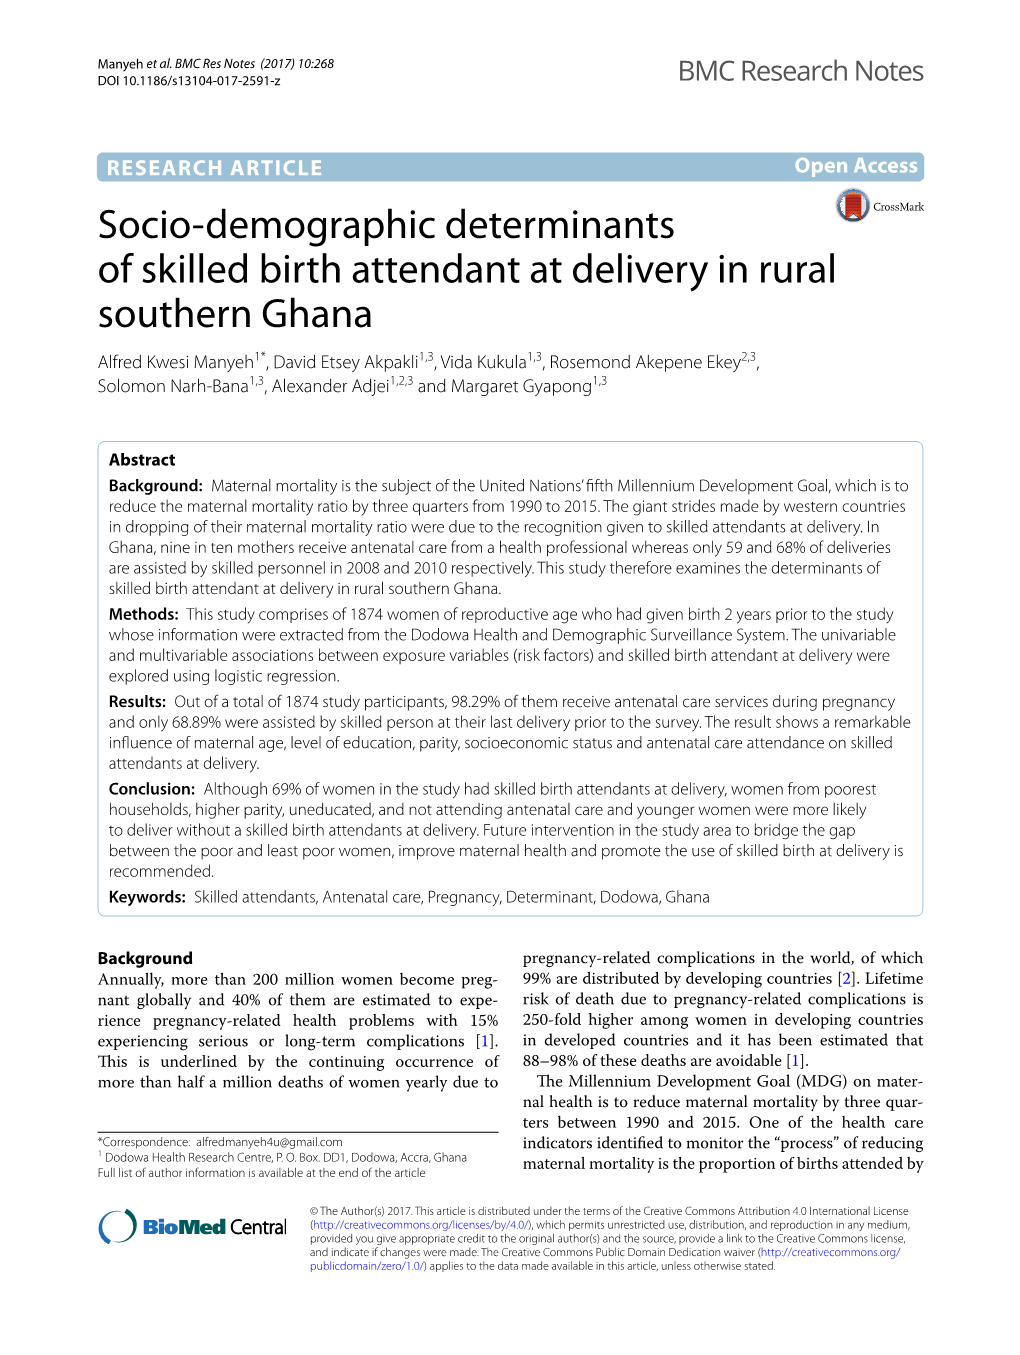 Socio-Demographic Determinants of Skilled Birth Attendant at Delivery In